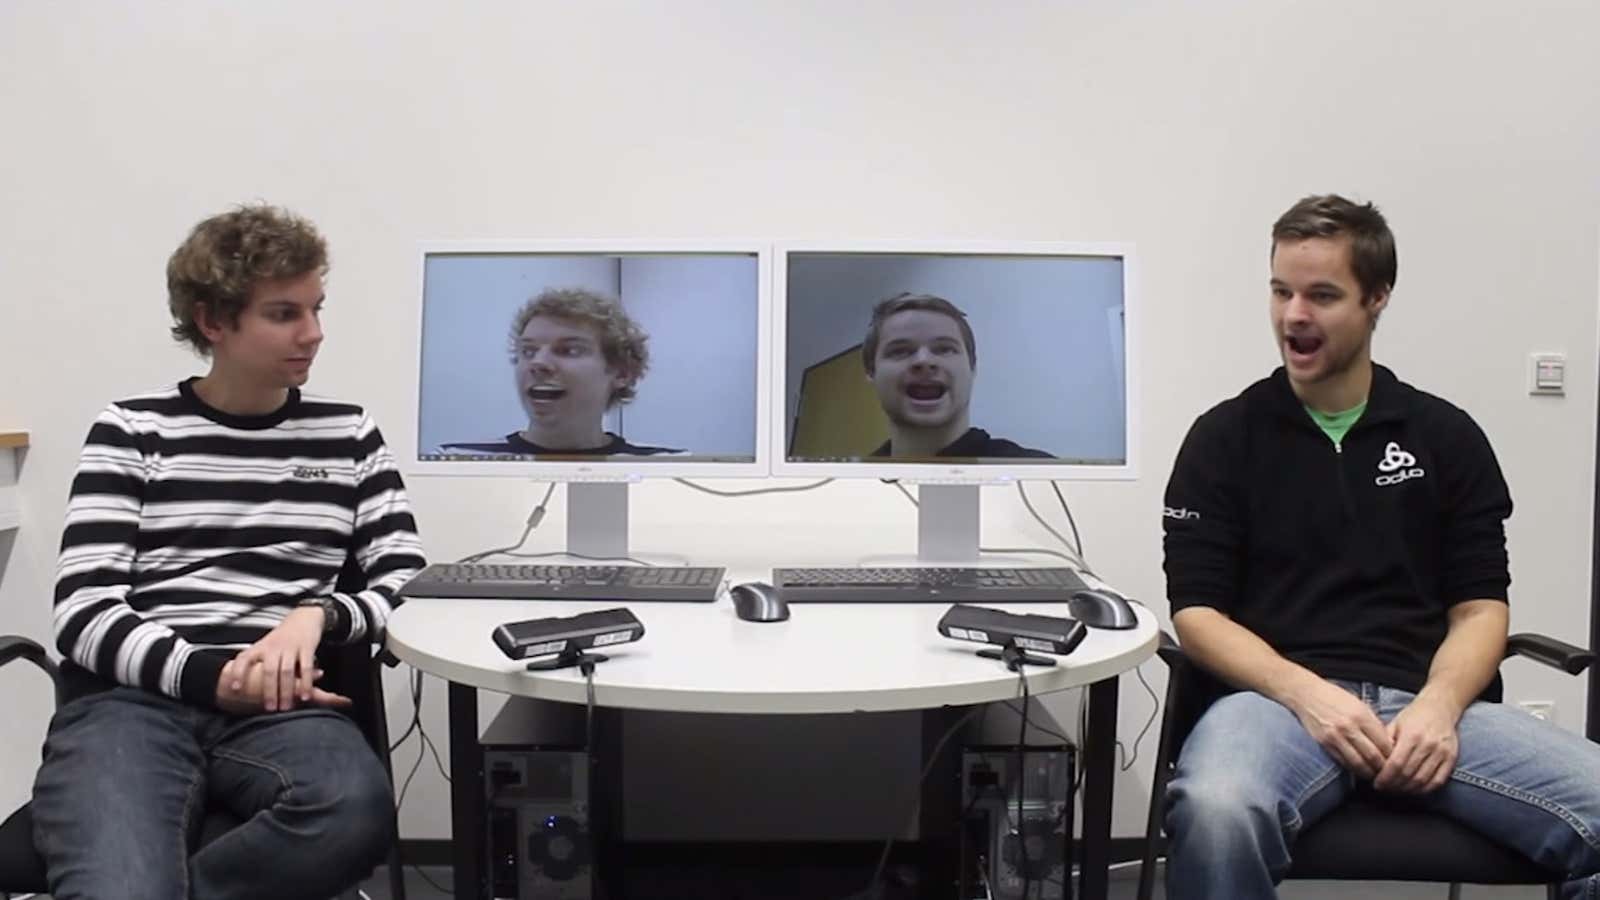 Look at their faces, then look at the screens.